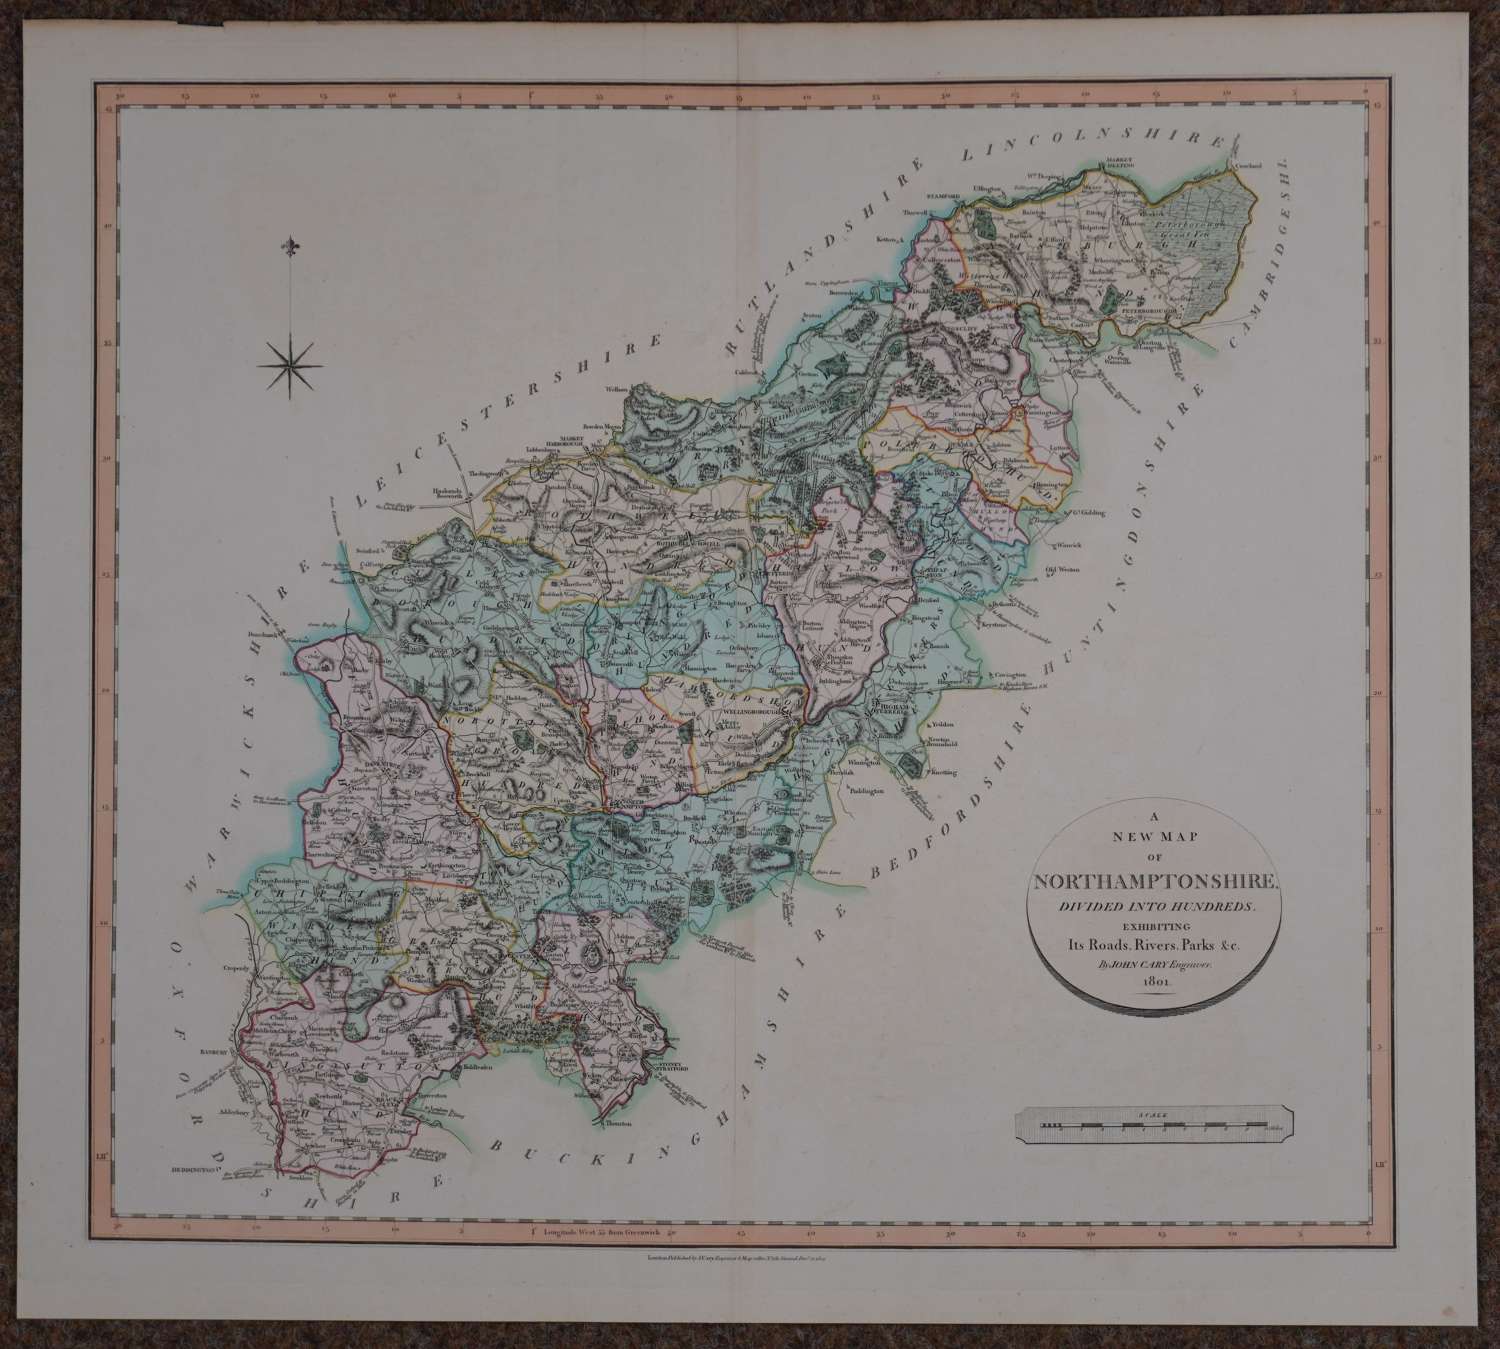 A New Map of Northamptonshire by John Cary